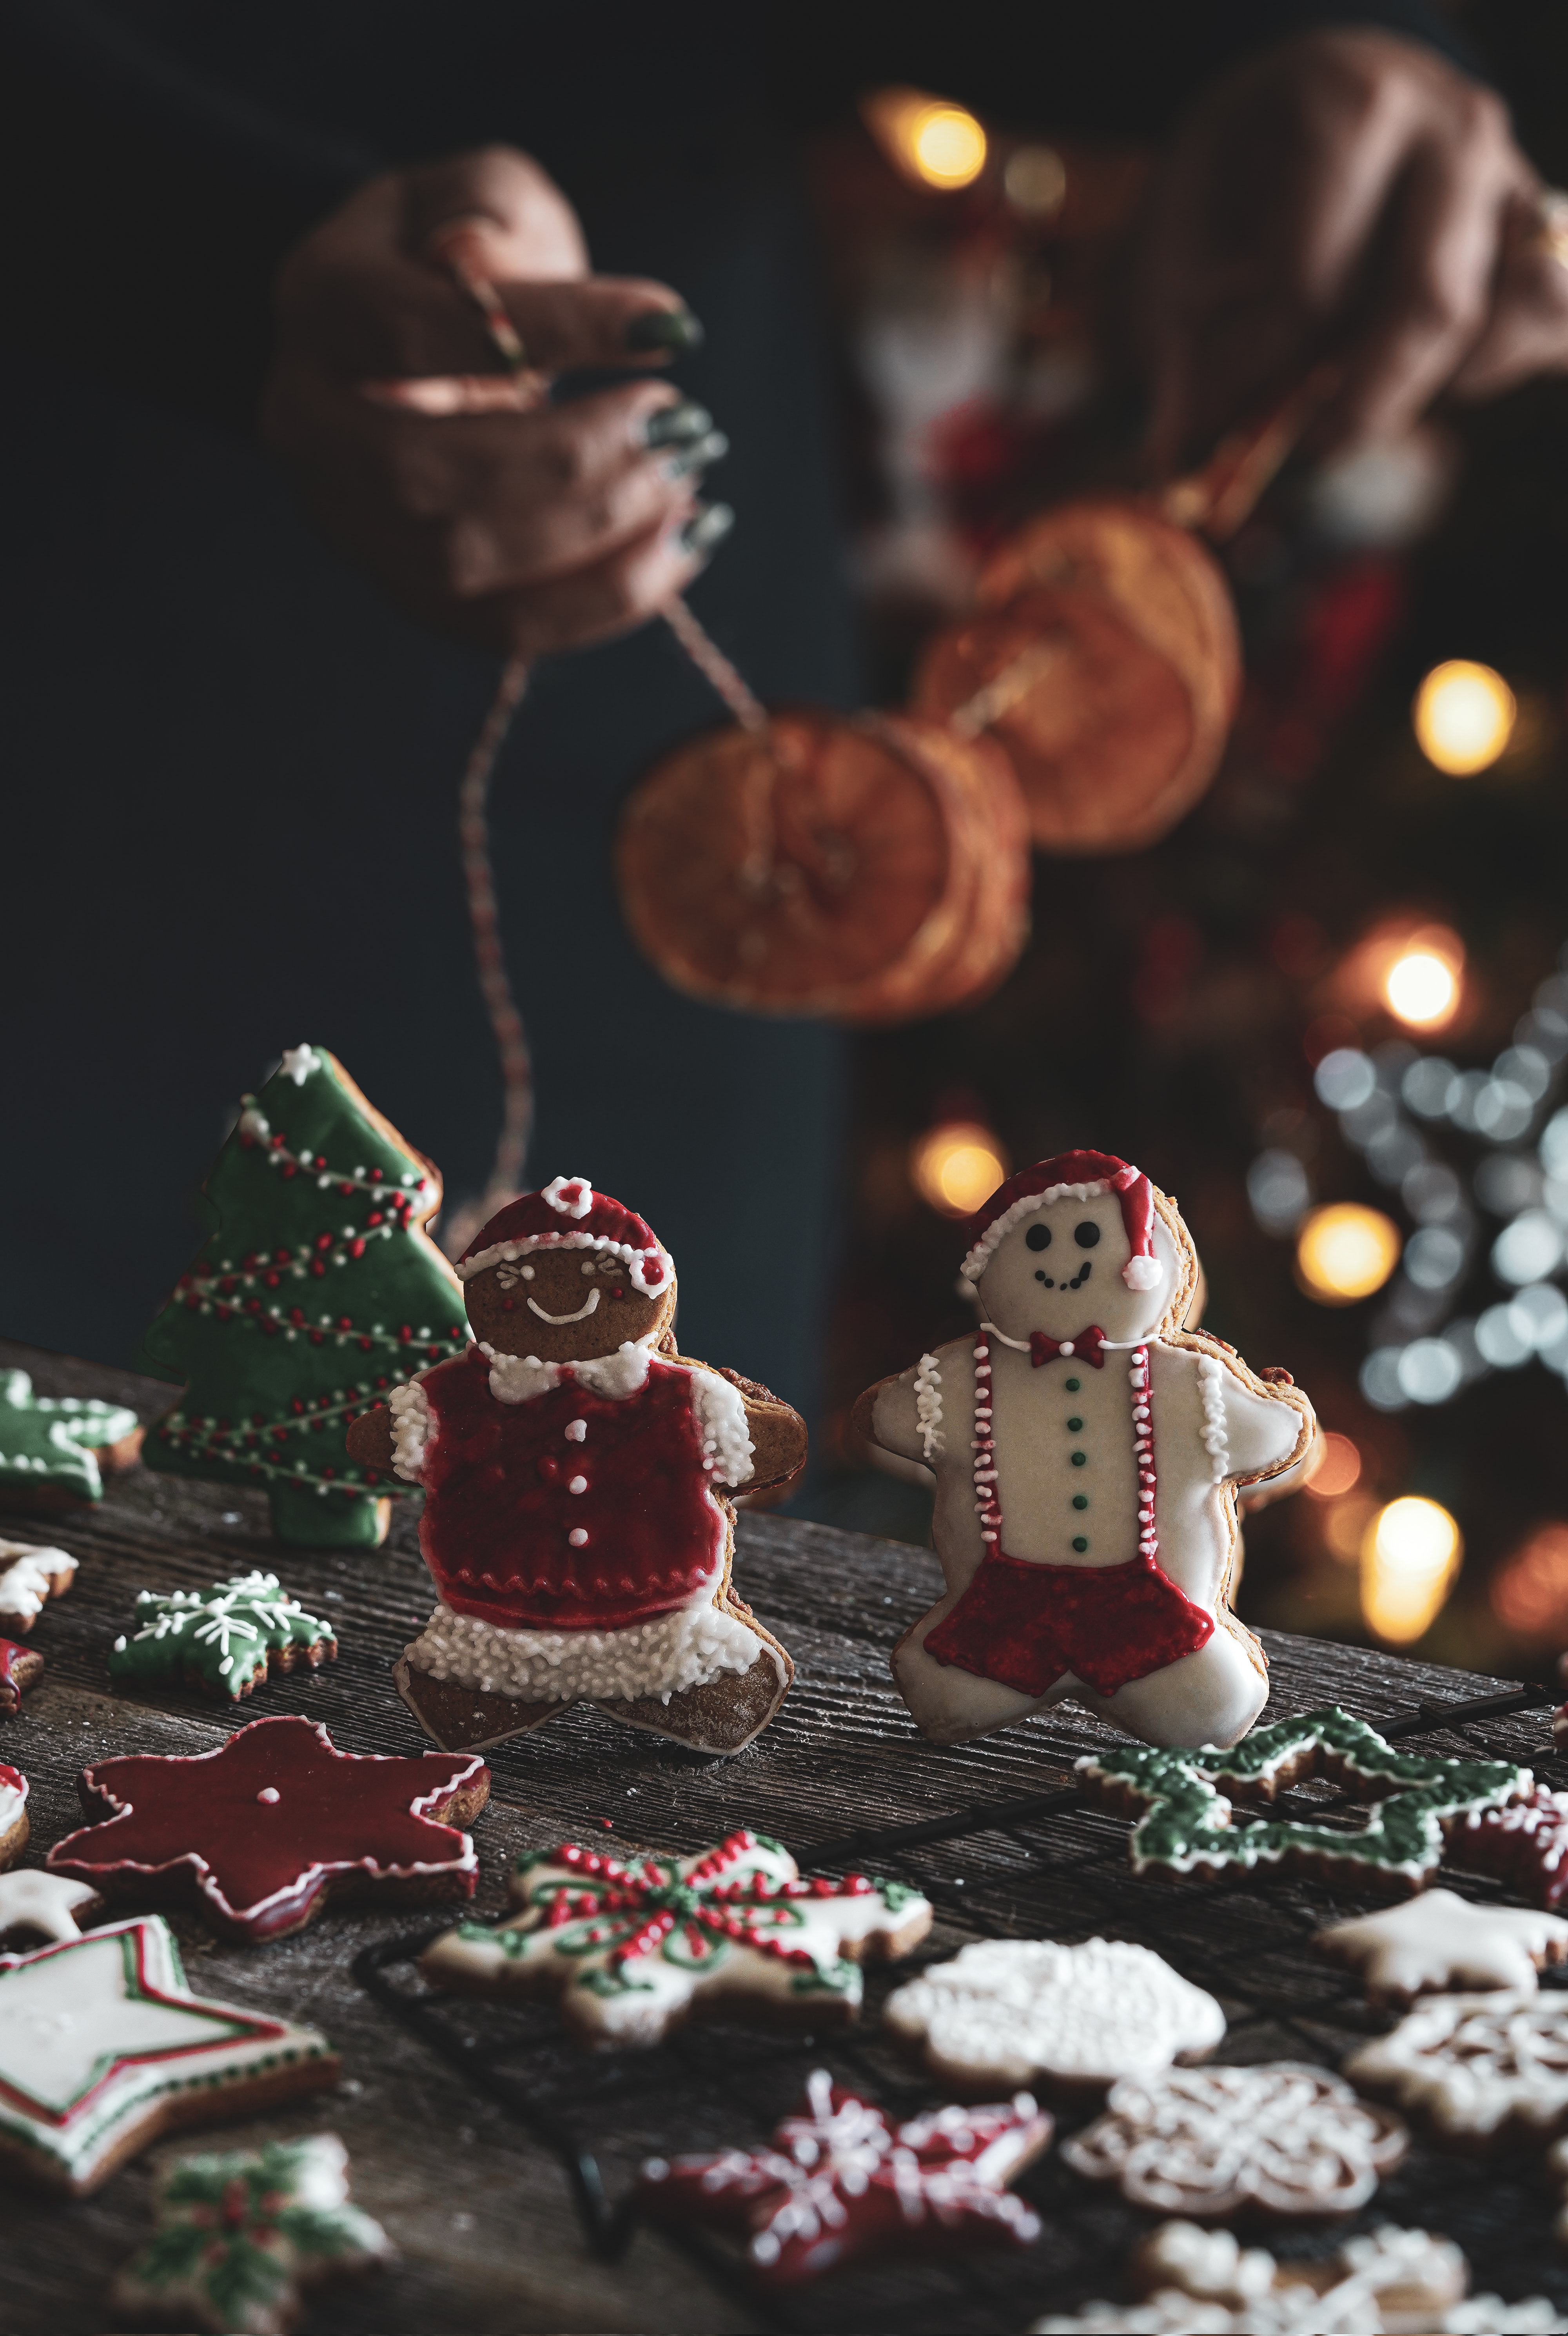 Best Gingerbread wallpapers for phone screen